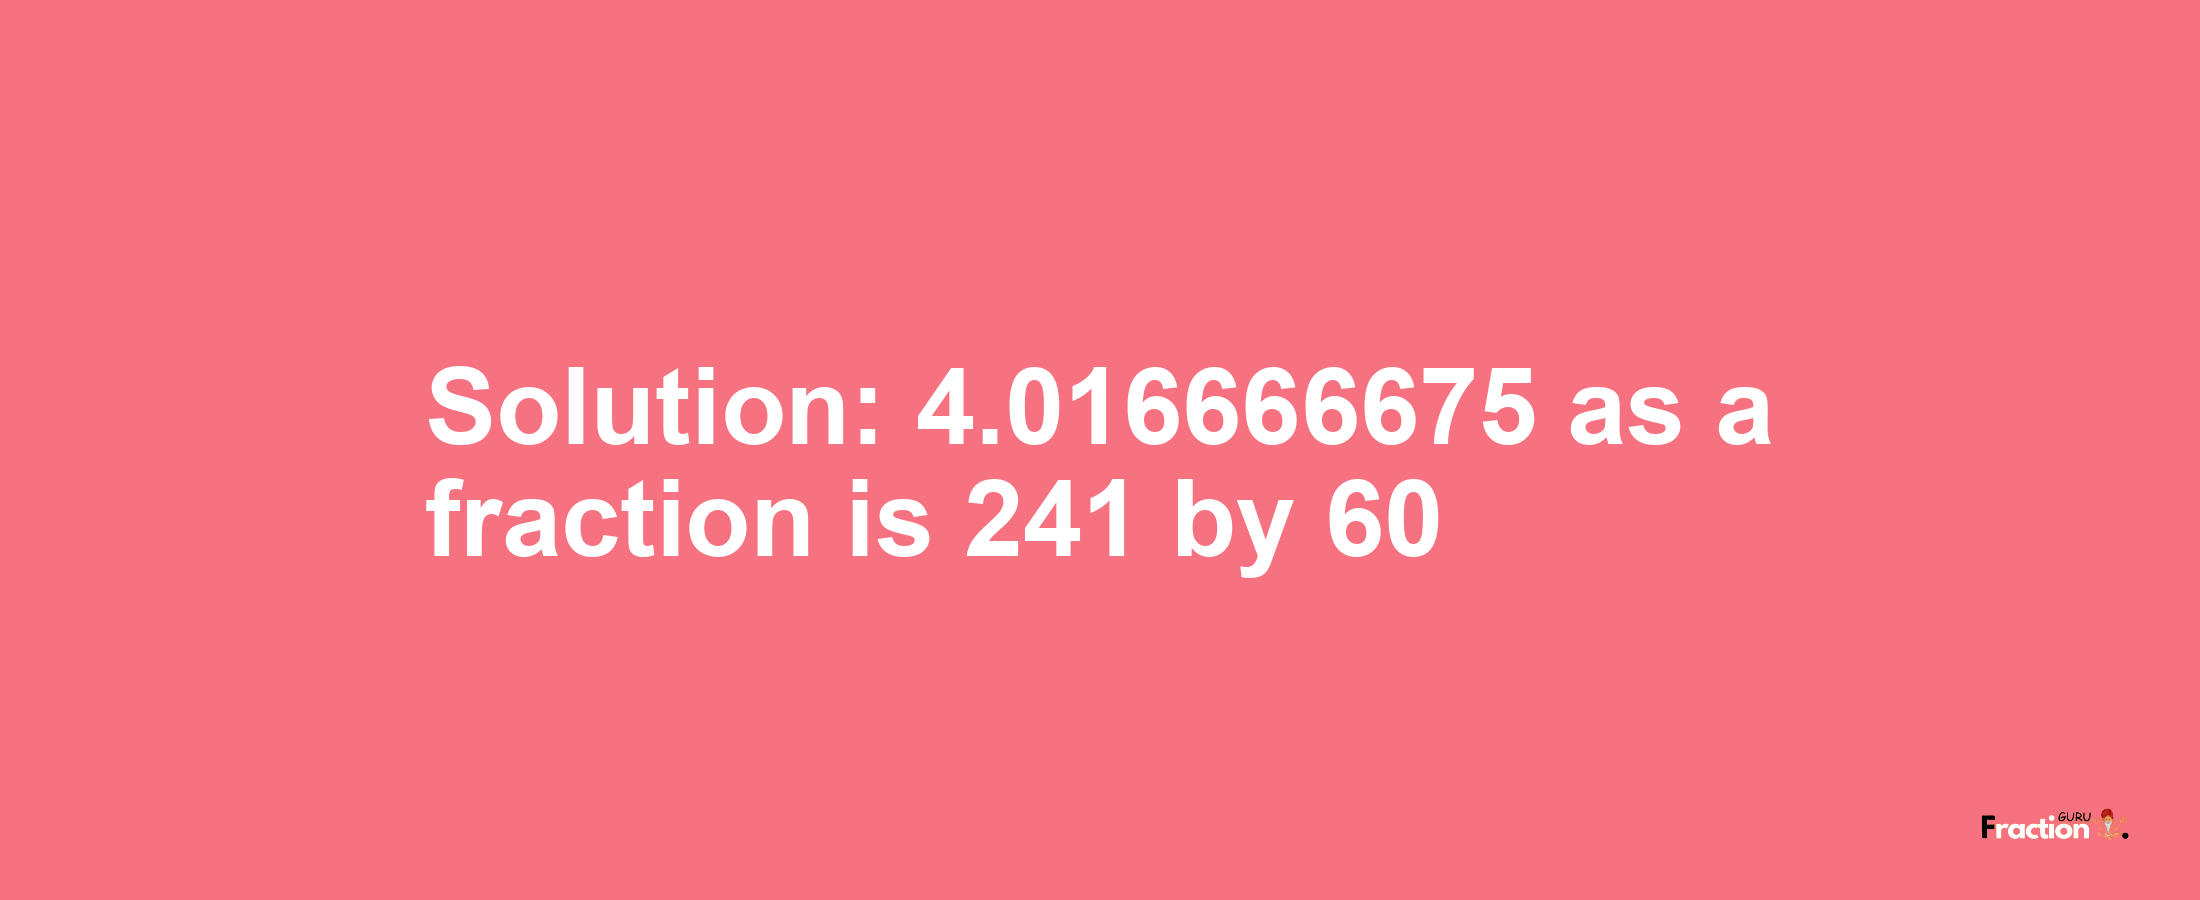 Solution:4.016666675 as a fraction is 241/60